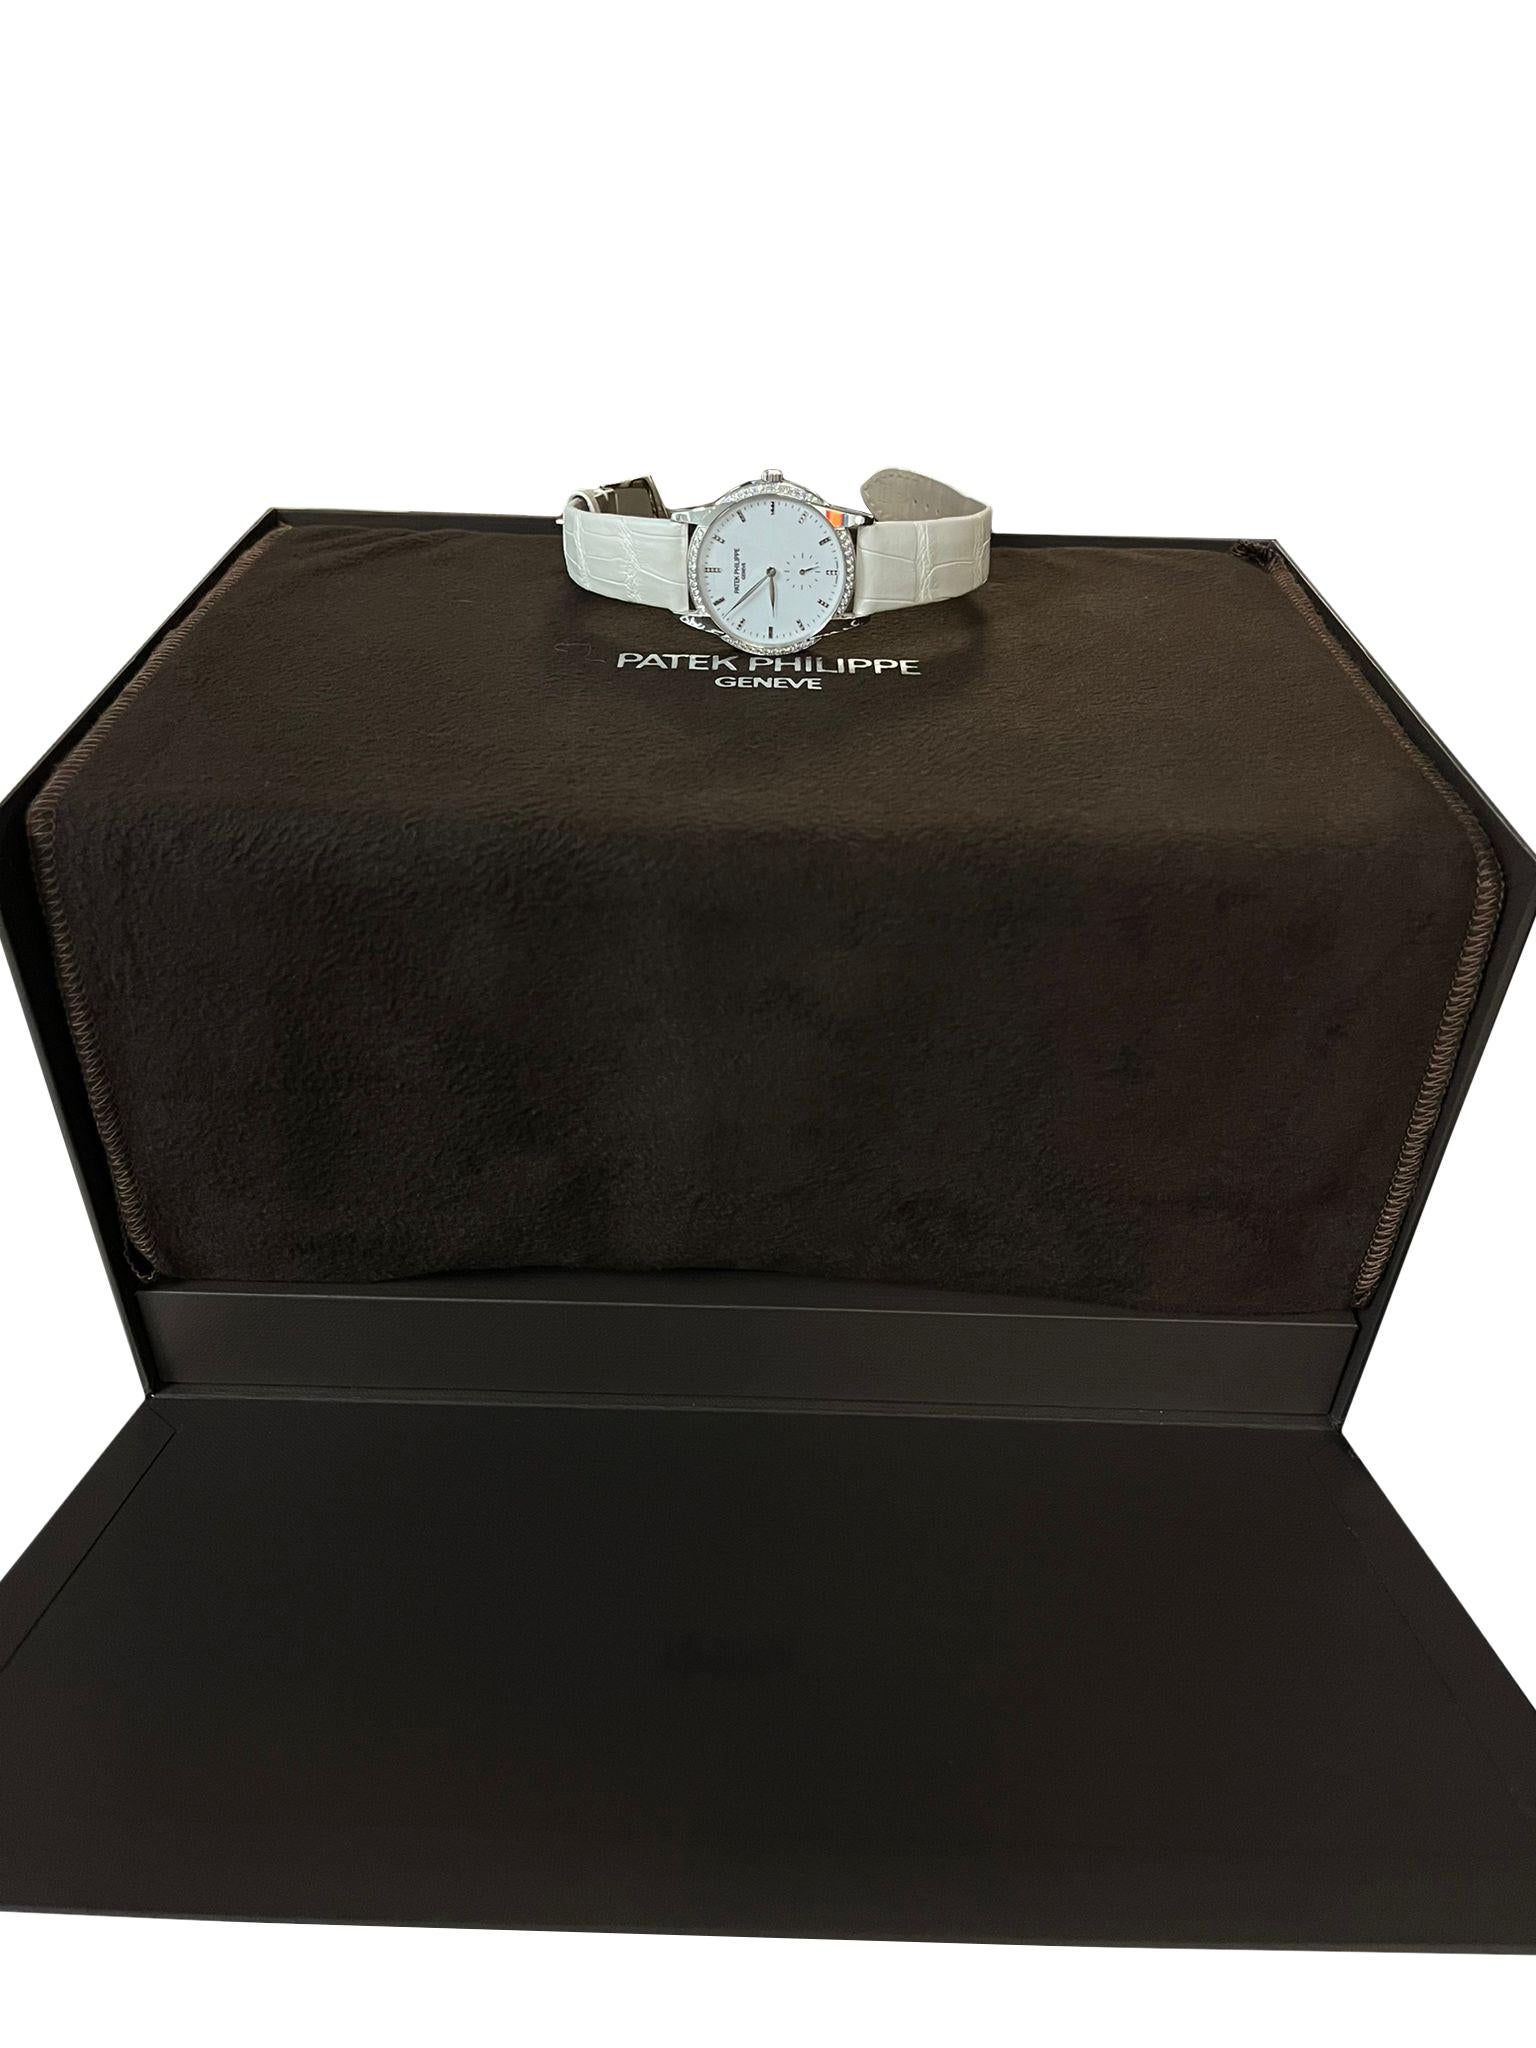 18kt white gold case with a white alligator leather strap. Fixed 18kt white gold 44 diamond-set bezel. White dial with white leaf-style shape hands and index hour markers. Minute markers around the outer rim. Dial Type: Analog. One - small seconds